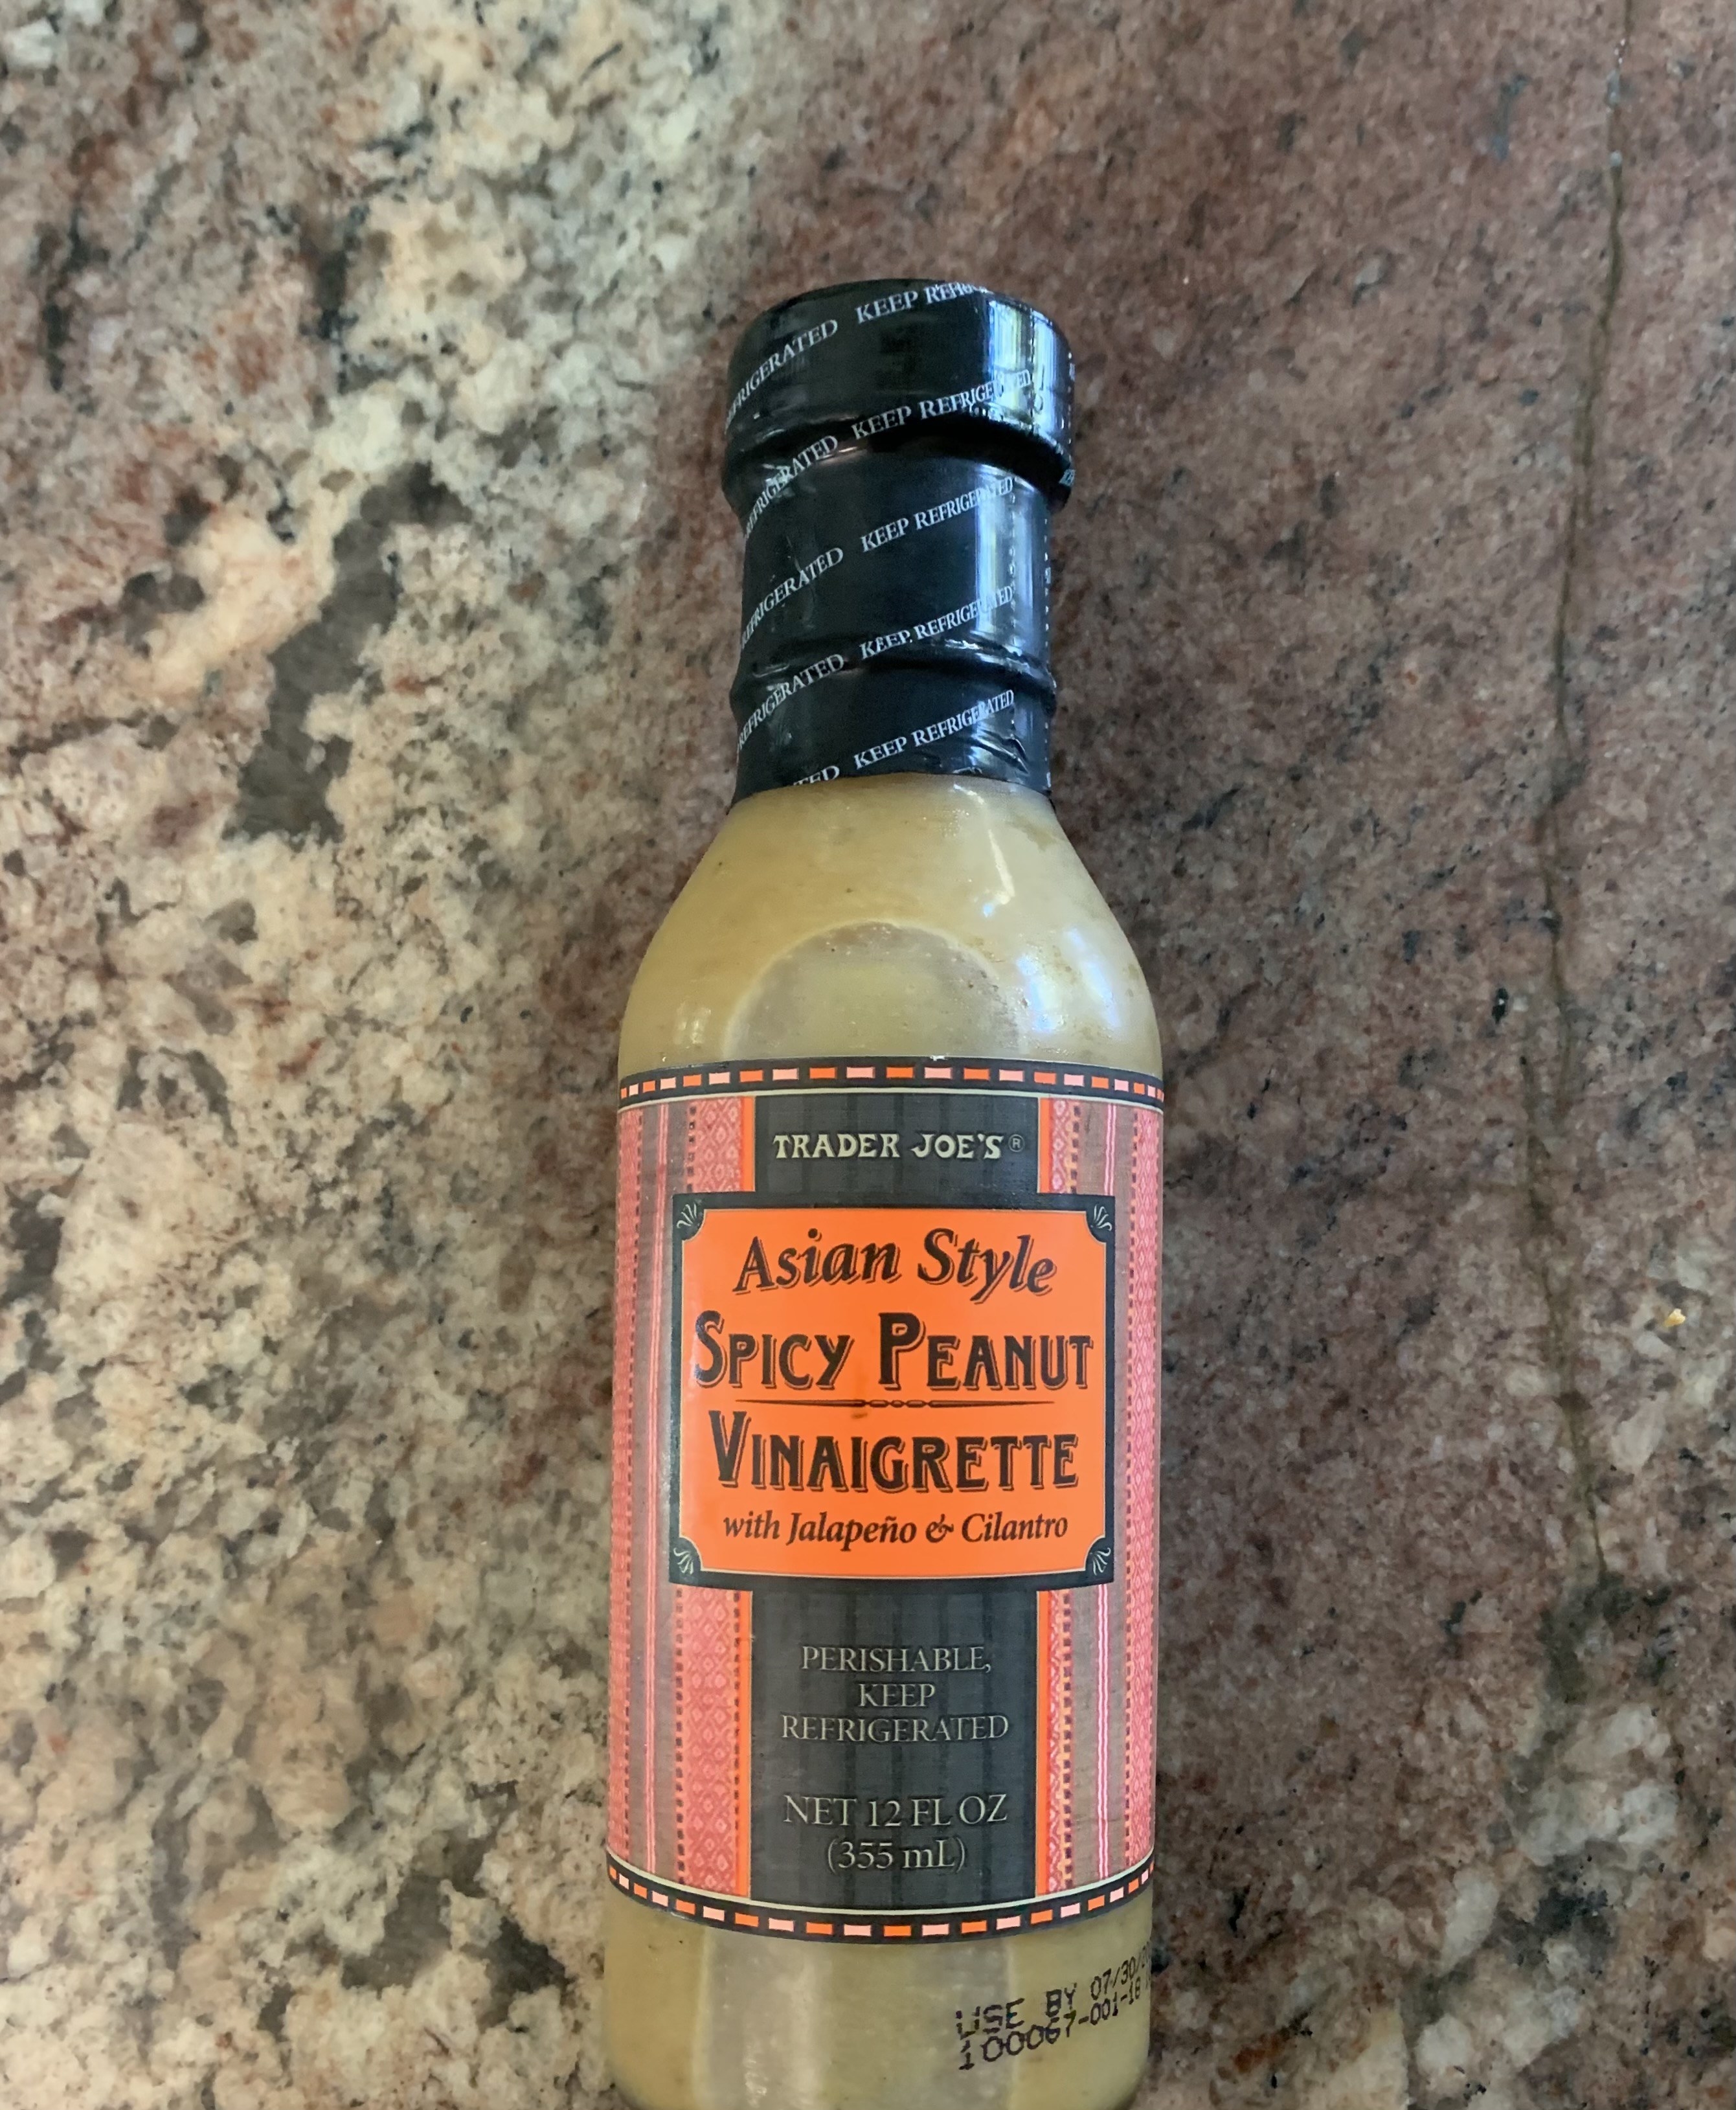 The Asian Style Spicy Peanut Vinaigrette bottle is on the counter